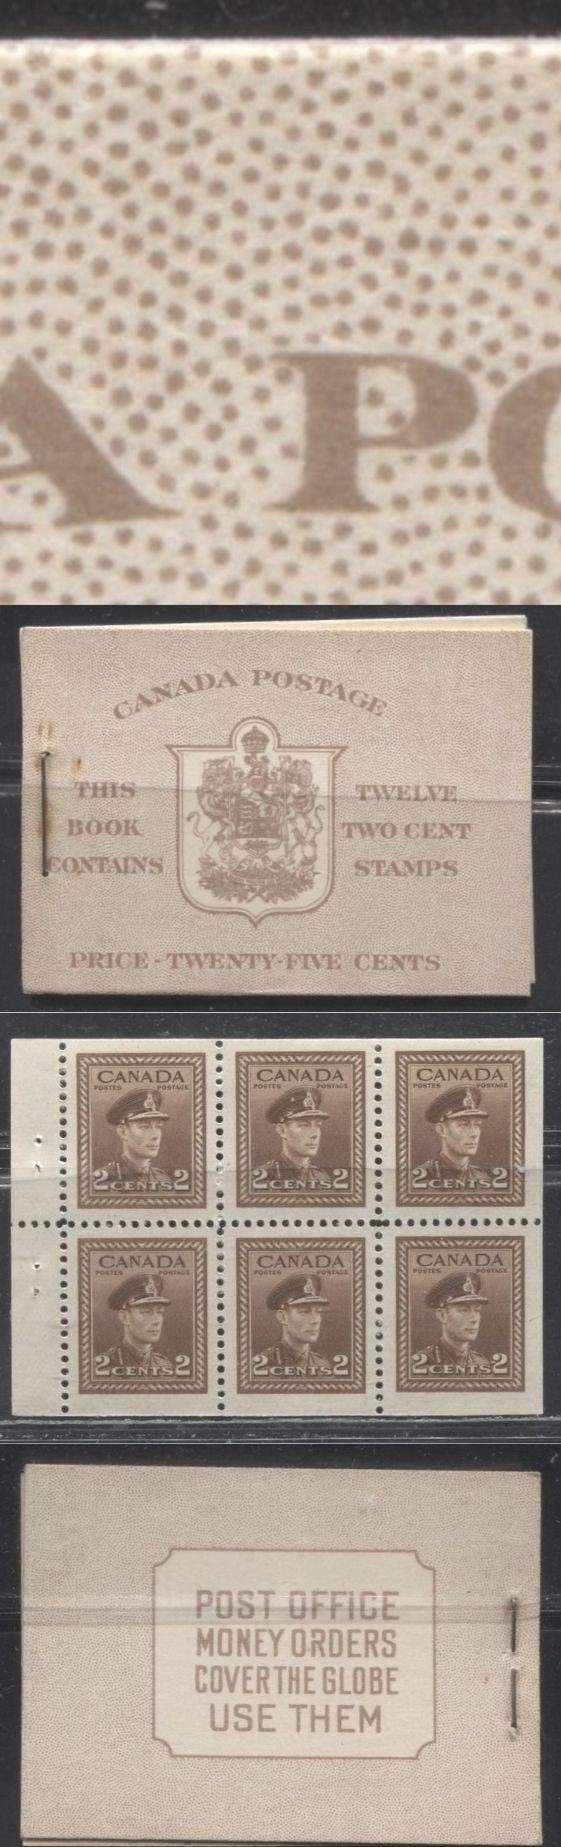 Lot 251 Canada #BK33a 1942-1949 War Issue, Complete 25¢ English Booklet, 2 Panes of 2c Brighter Brown, Smooth Vertical Wove Paper, Harris Front Cover Type IIc, 6c Airmail Rate Page